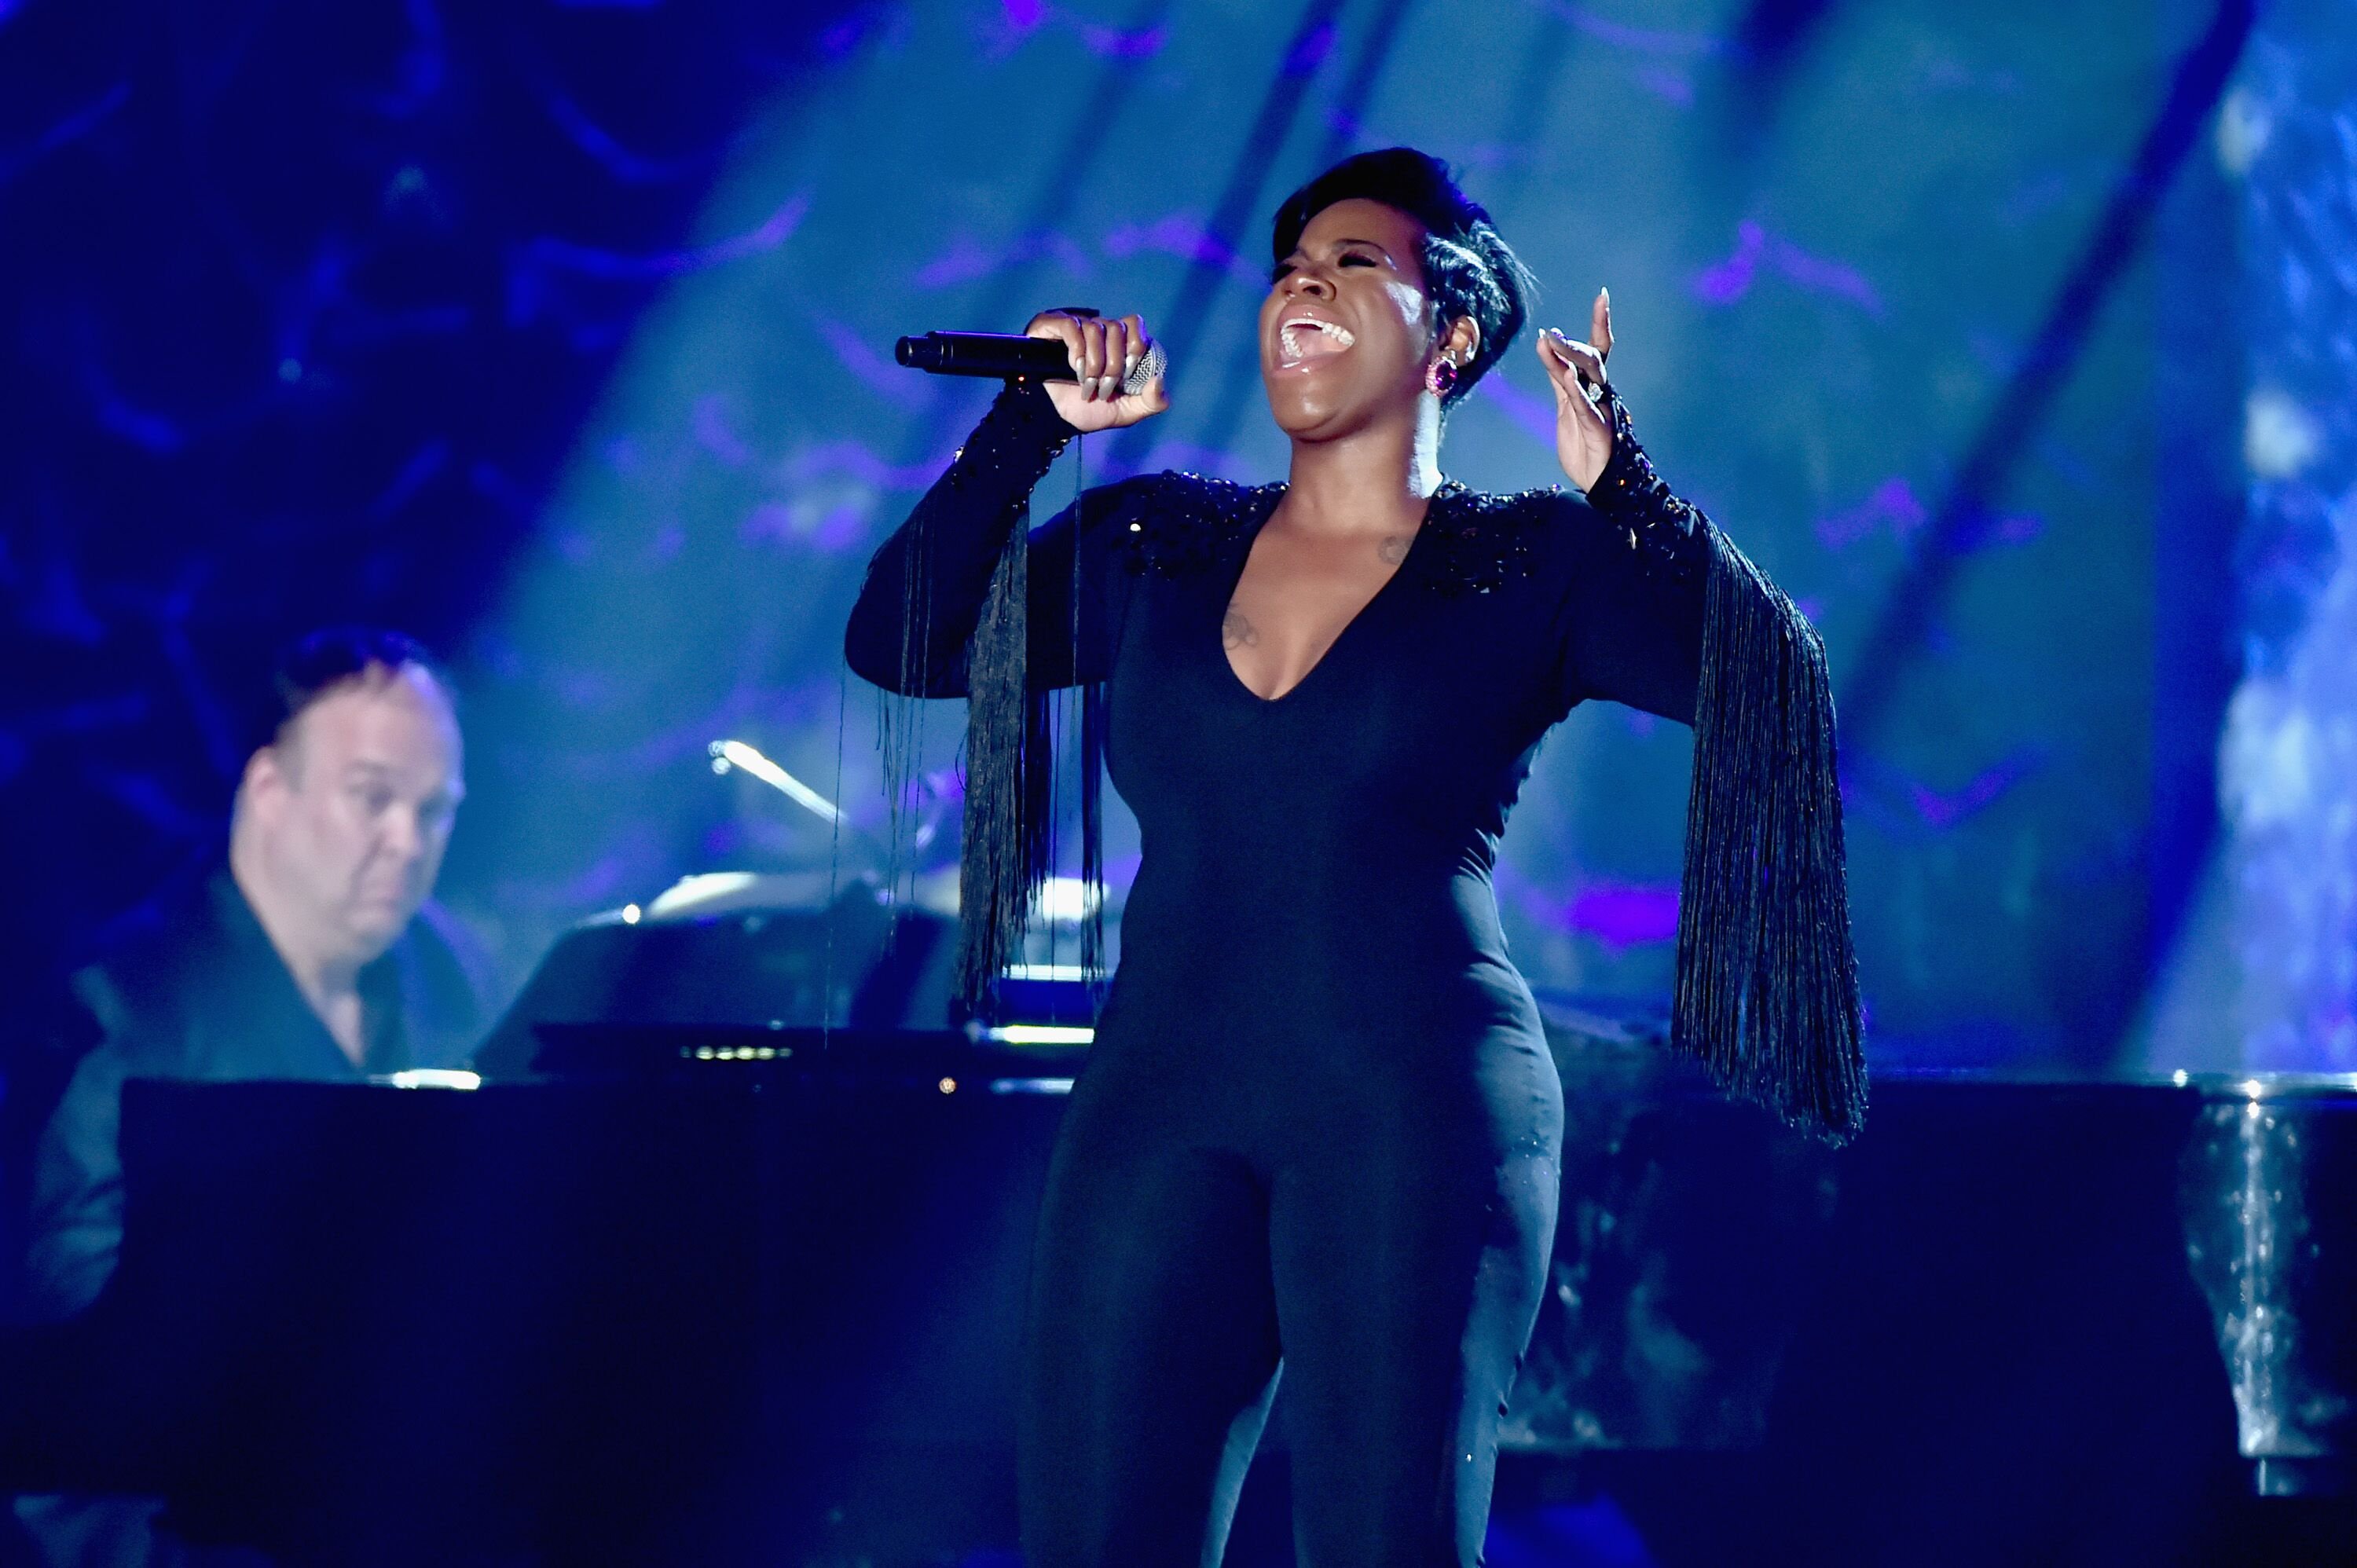  Fantasia performs onstage at the Songwriters Hall of Fame 49th Annual Induction and Awards Dinner in New York in 2018 | Source: Getty Images